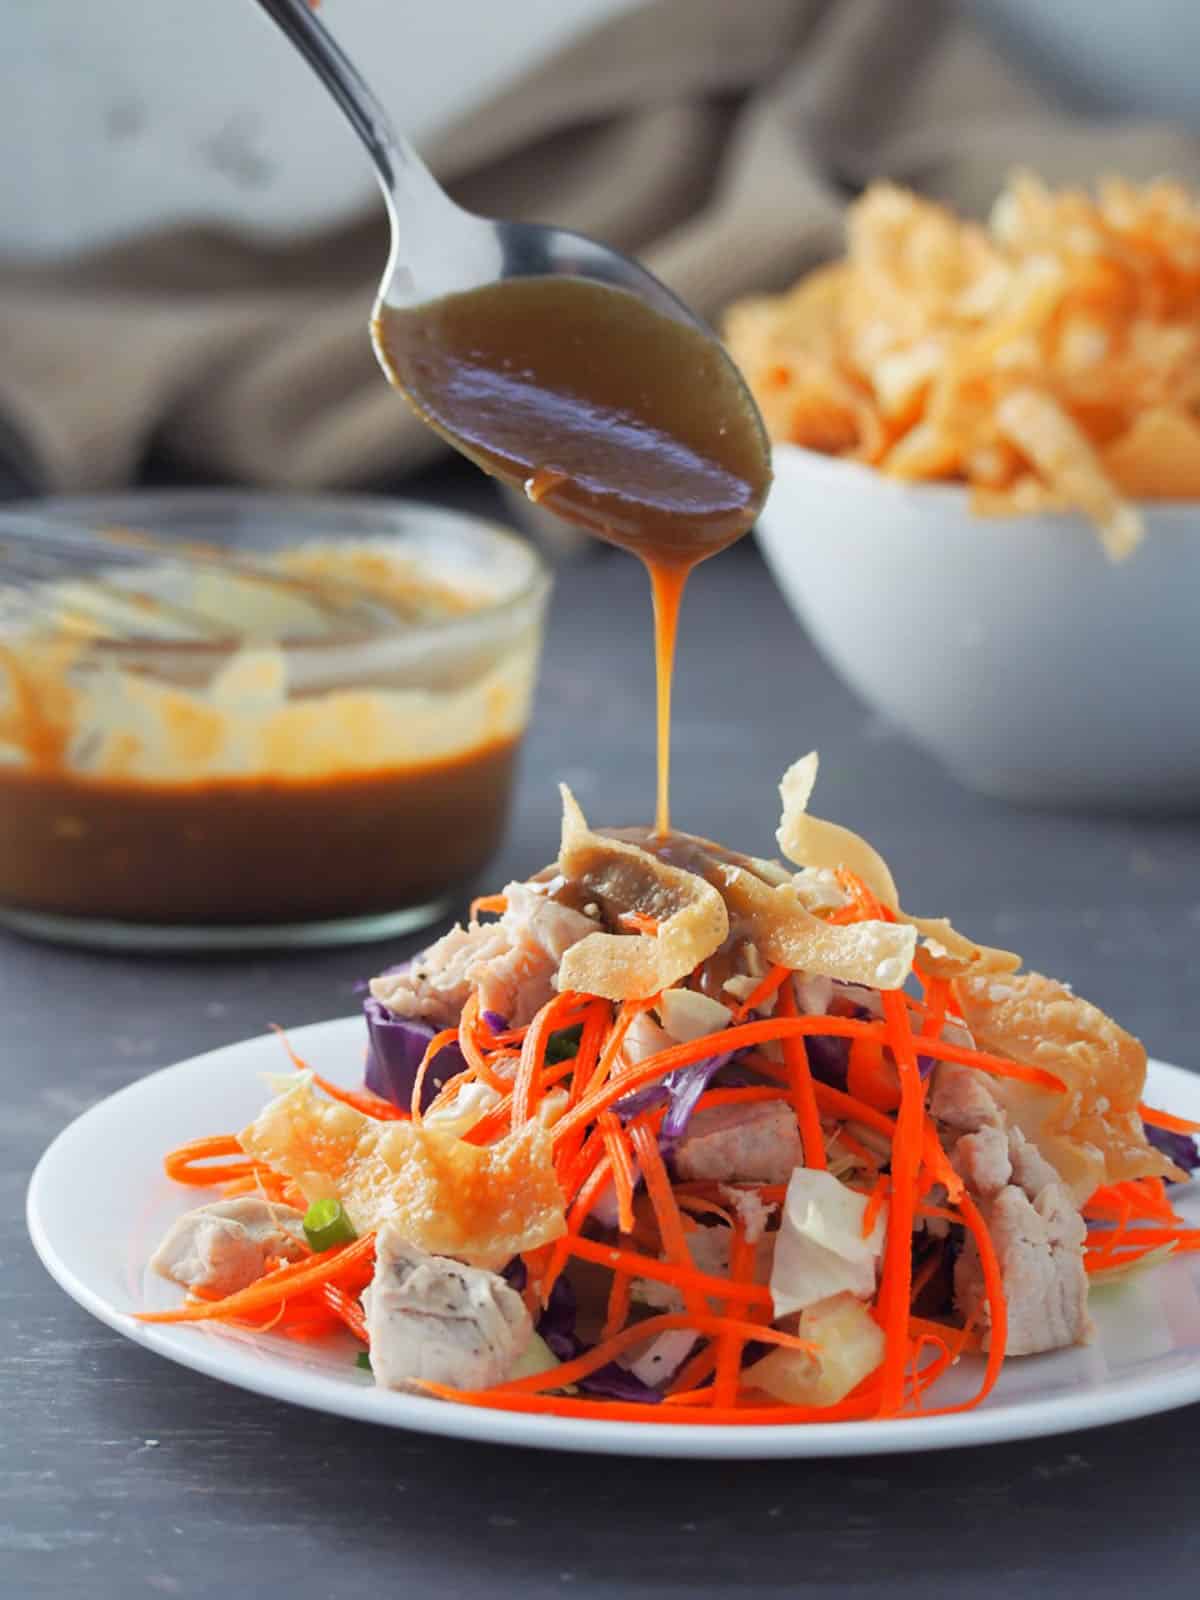 pouring peanut dressing on a plate of salad